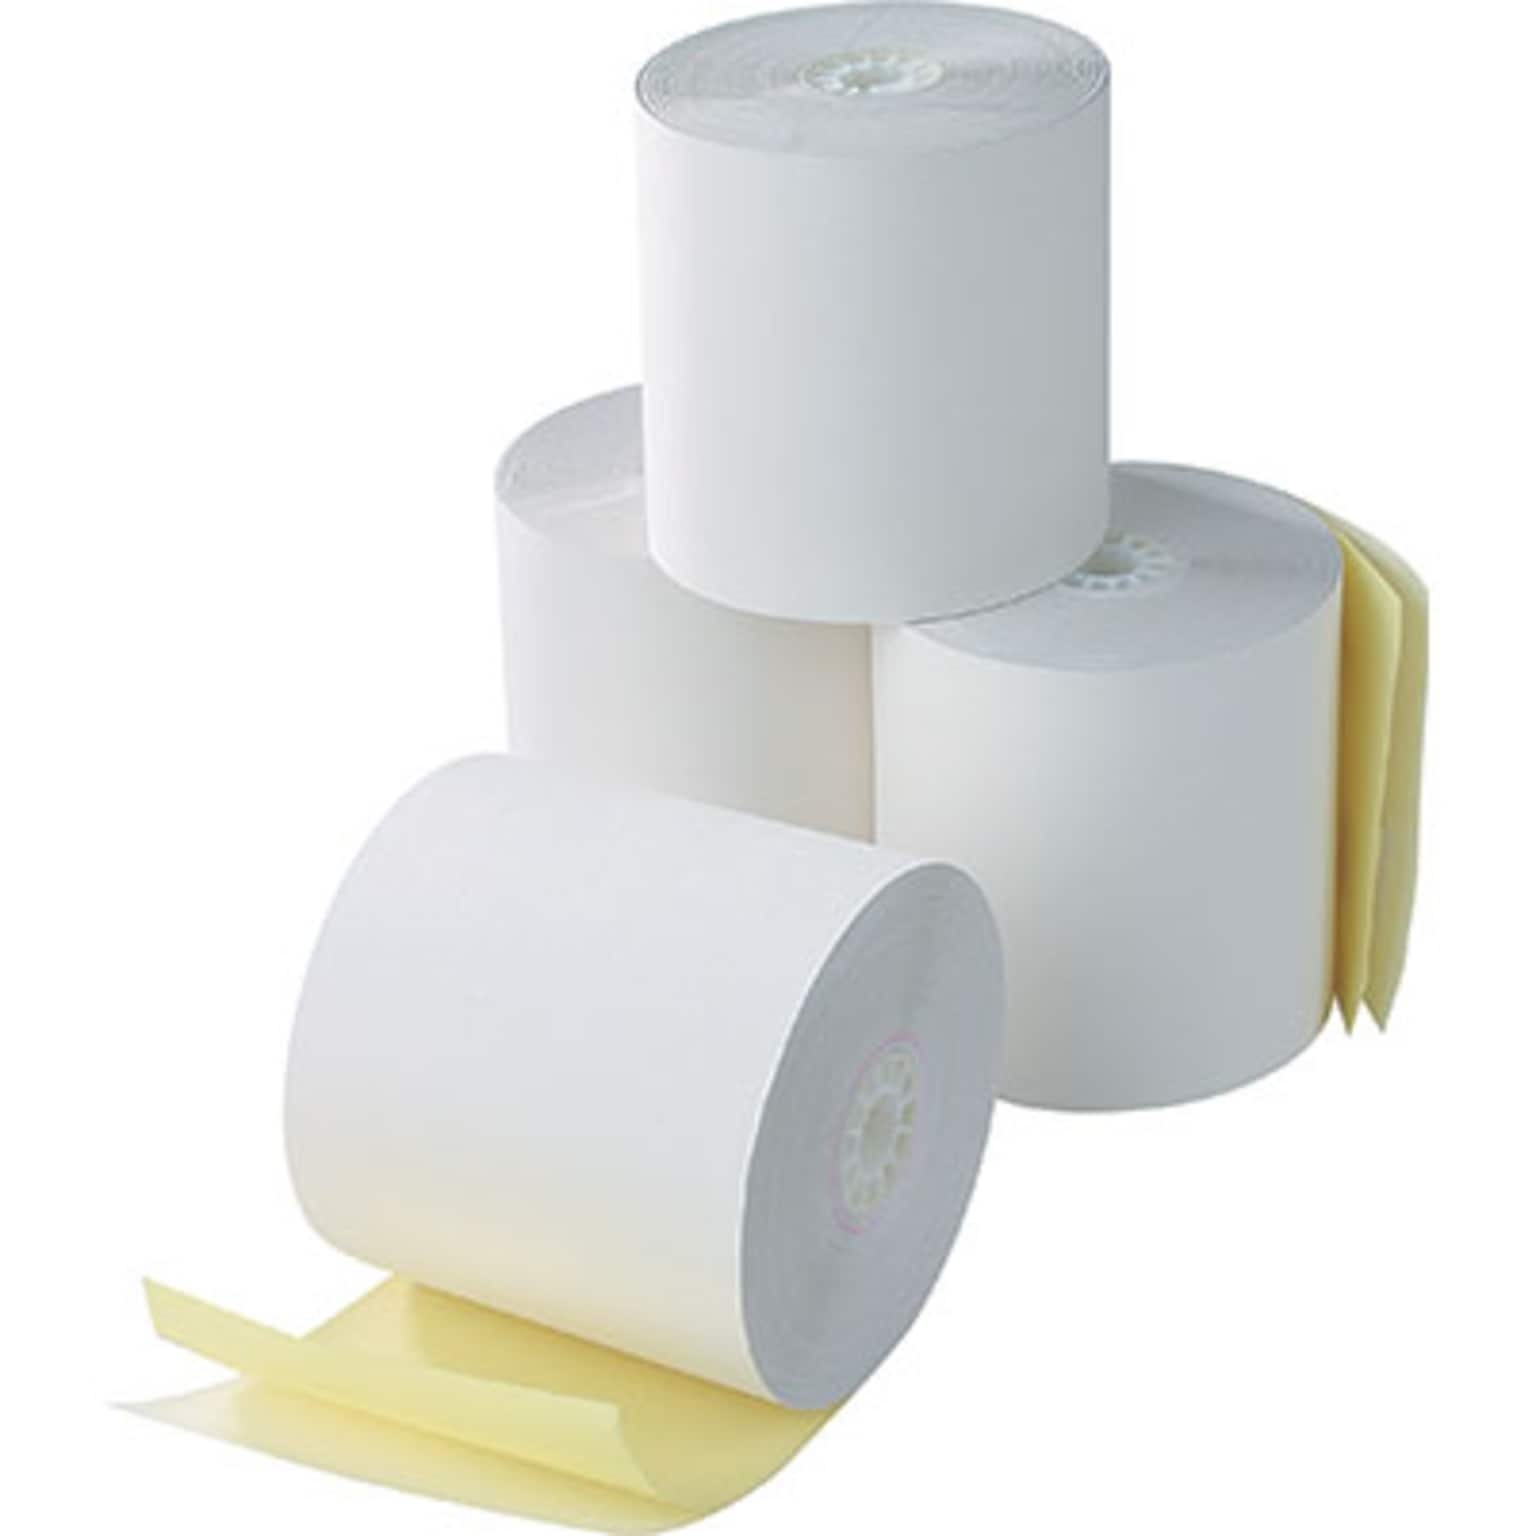 Quill Brand® Cash Register Rolls Carbonless 2-Ply White/Canary, 3-1/4x108 ft., 48/Pack (845922)